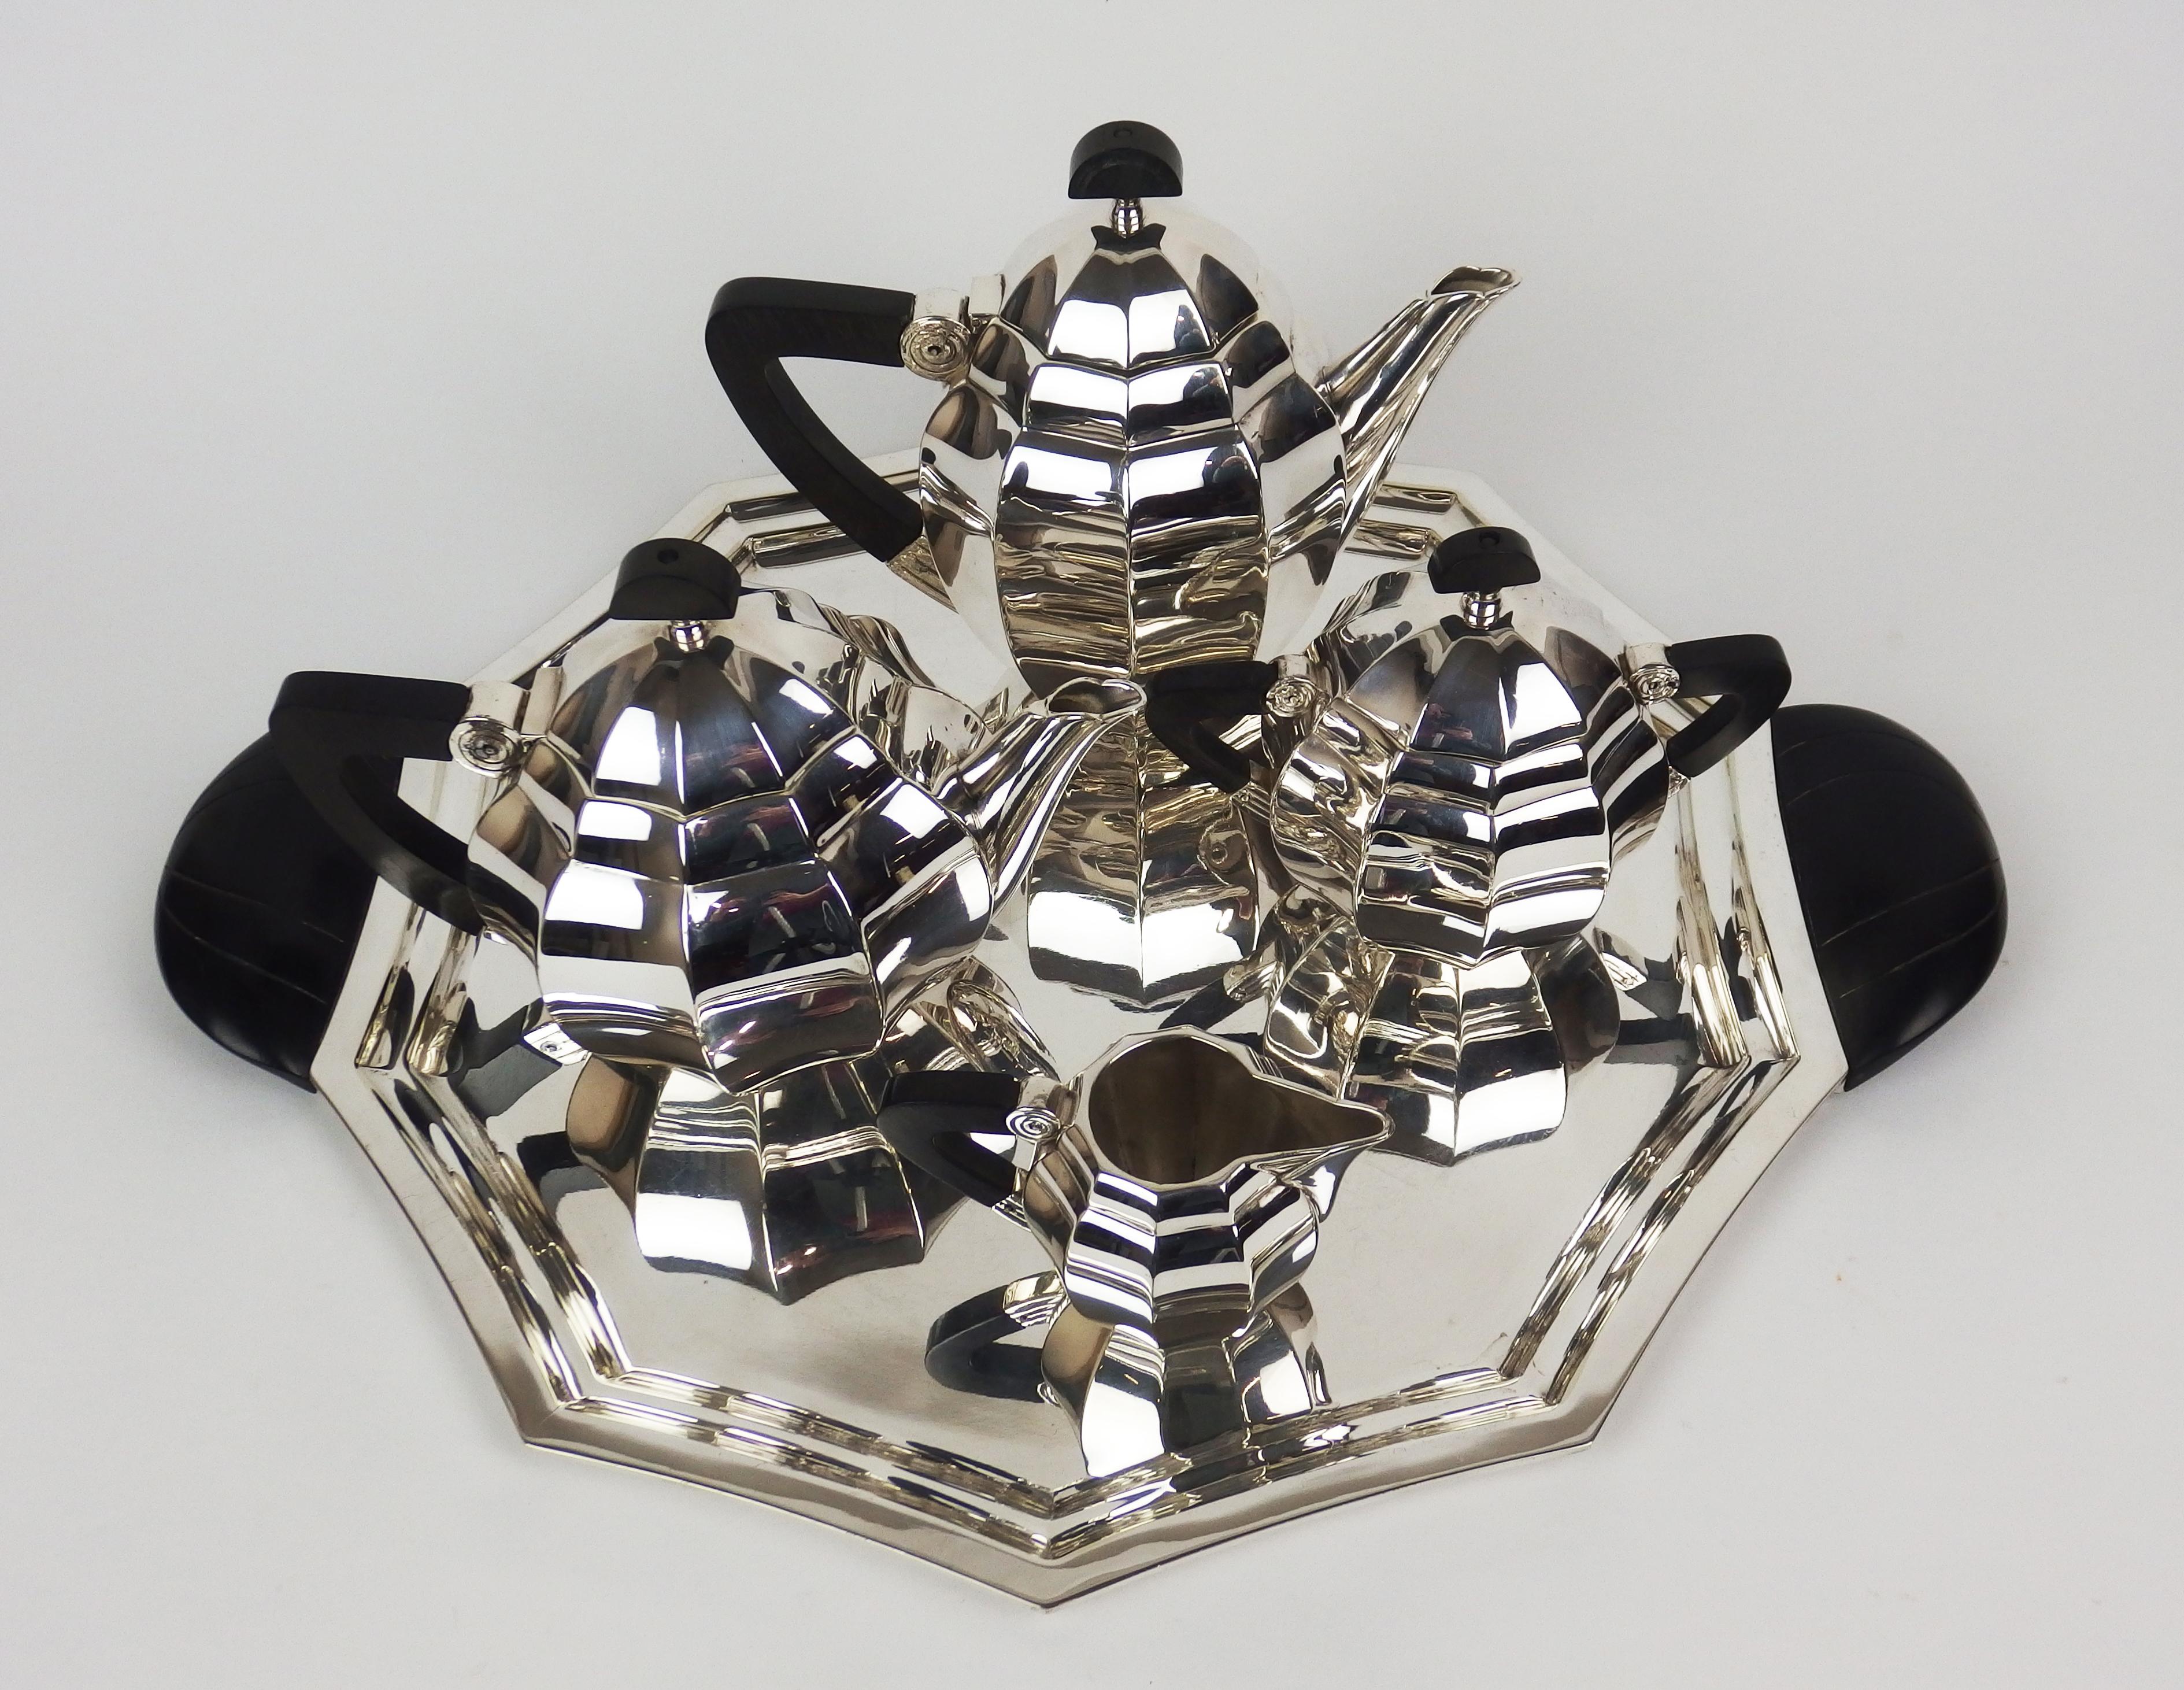 An Art Deco tea-coffee service in silvered metal including a coffee pot ,a tea pot,a milk pot ,a sugar dish and a tray in silvered metal. The handles are in black bakelite. Designed by Maurice Dufrene for Gallia Christofle.
Dimensions:
-coffee